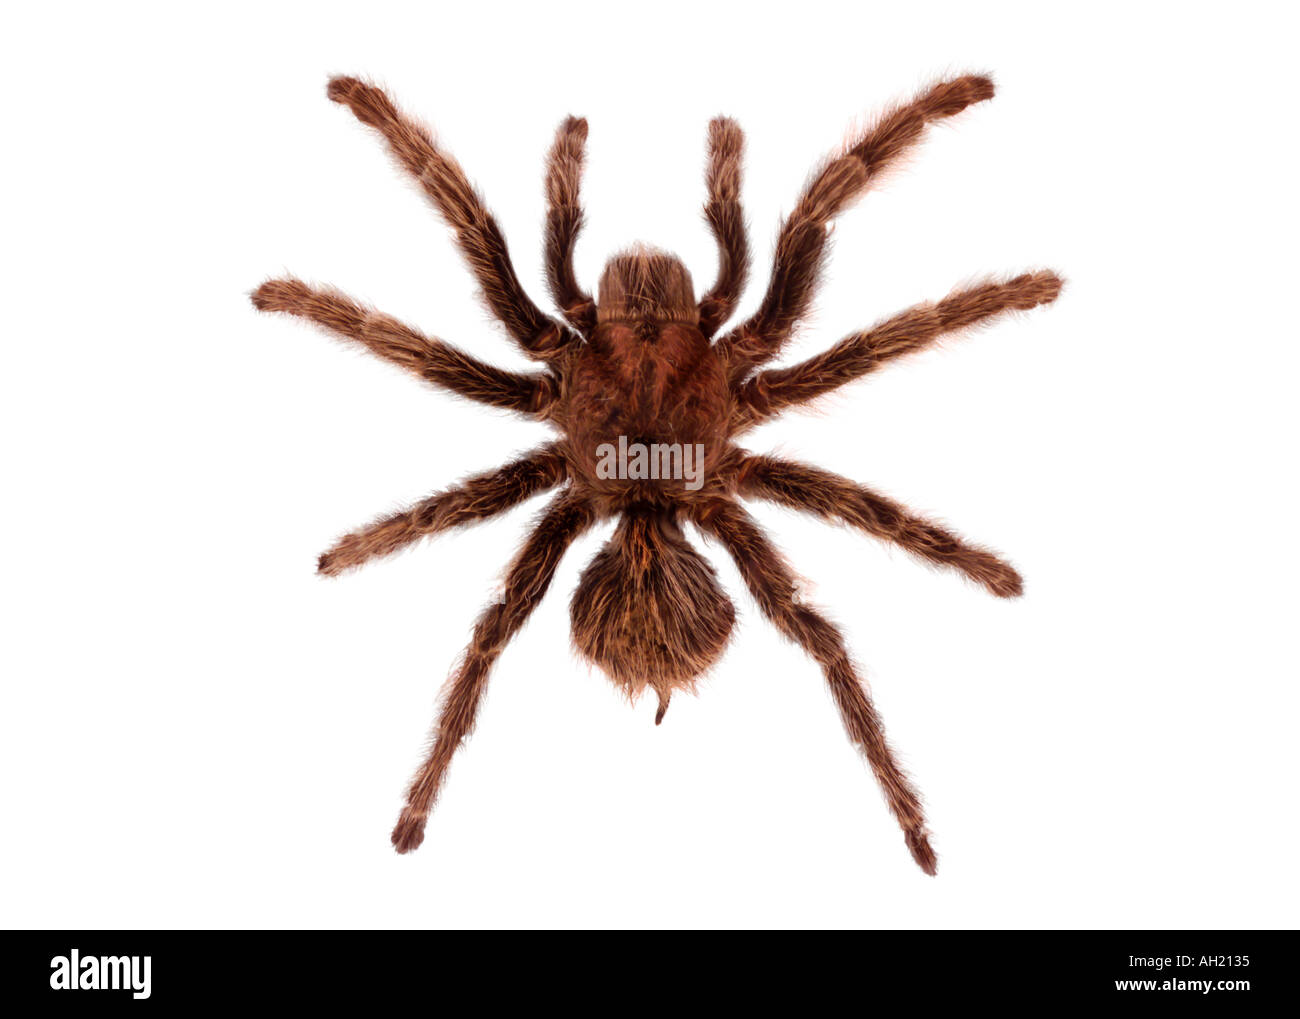 Sill life of a tarantula silhouetted on white background Stock Photo